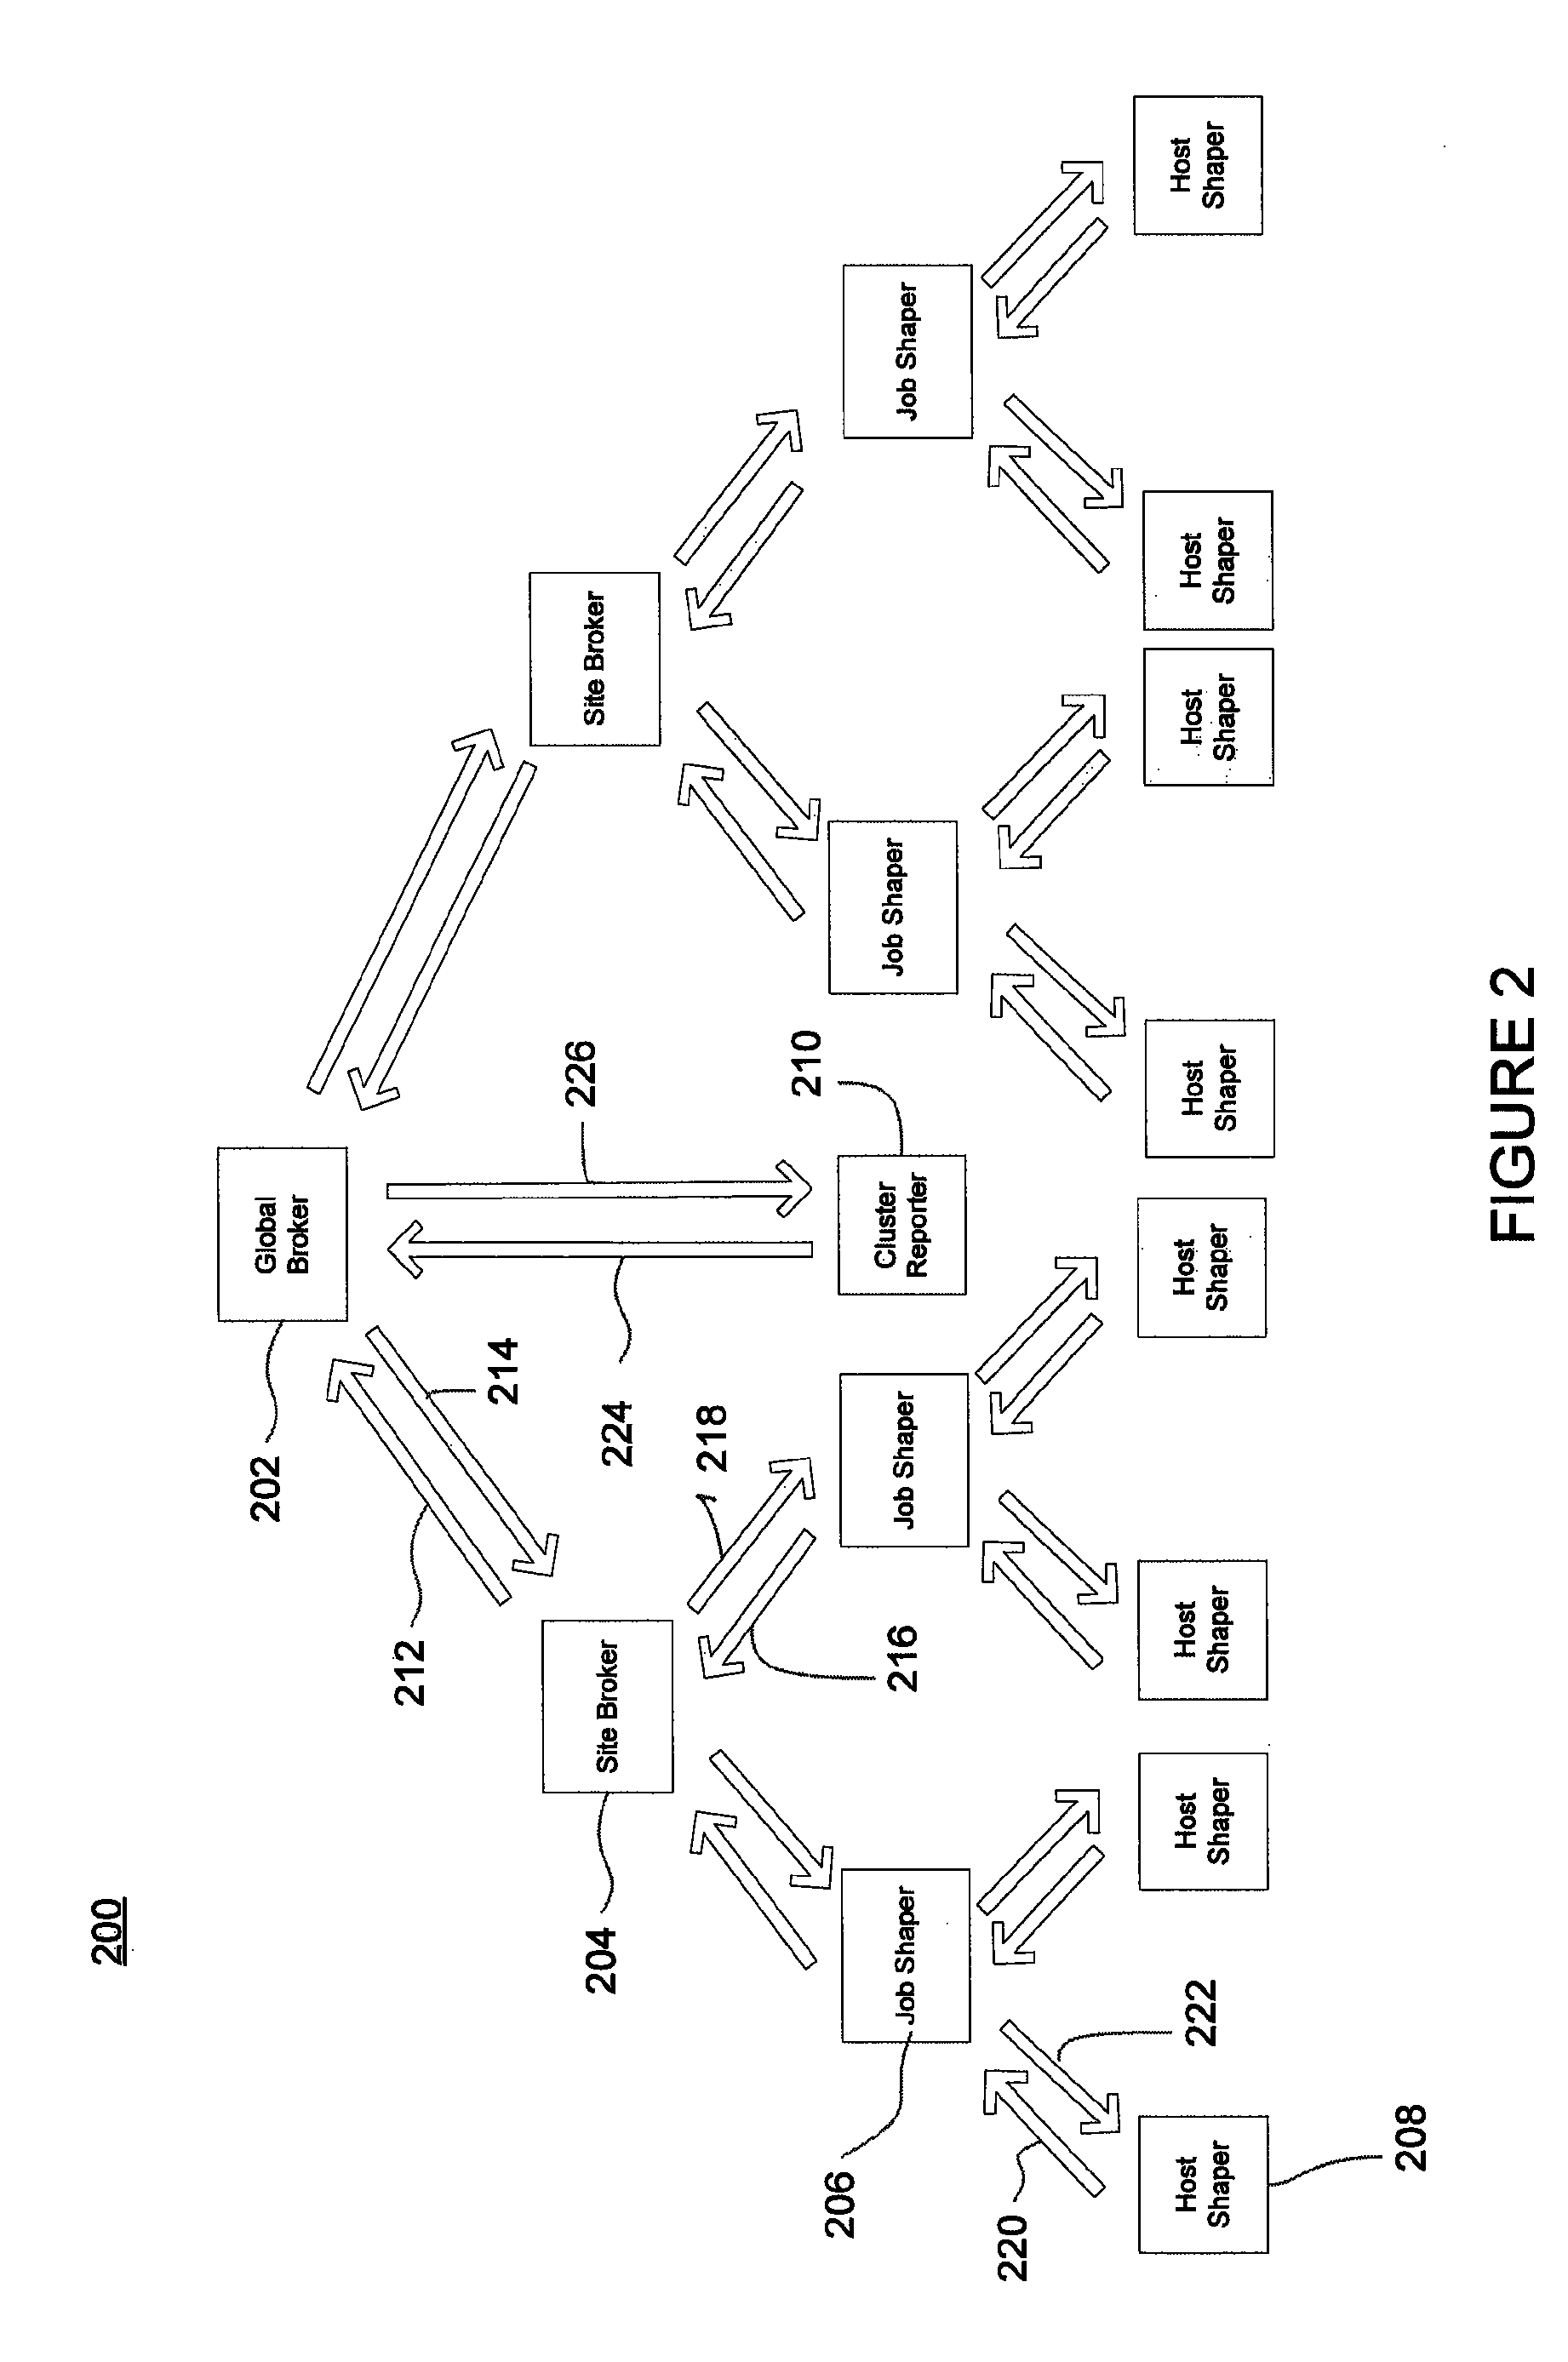 System to share network bandwidth among competing applications